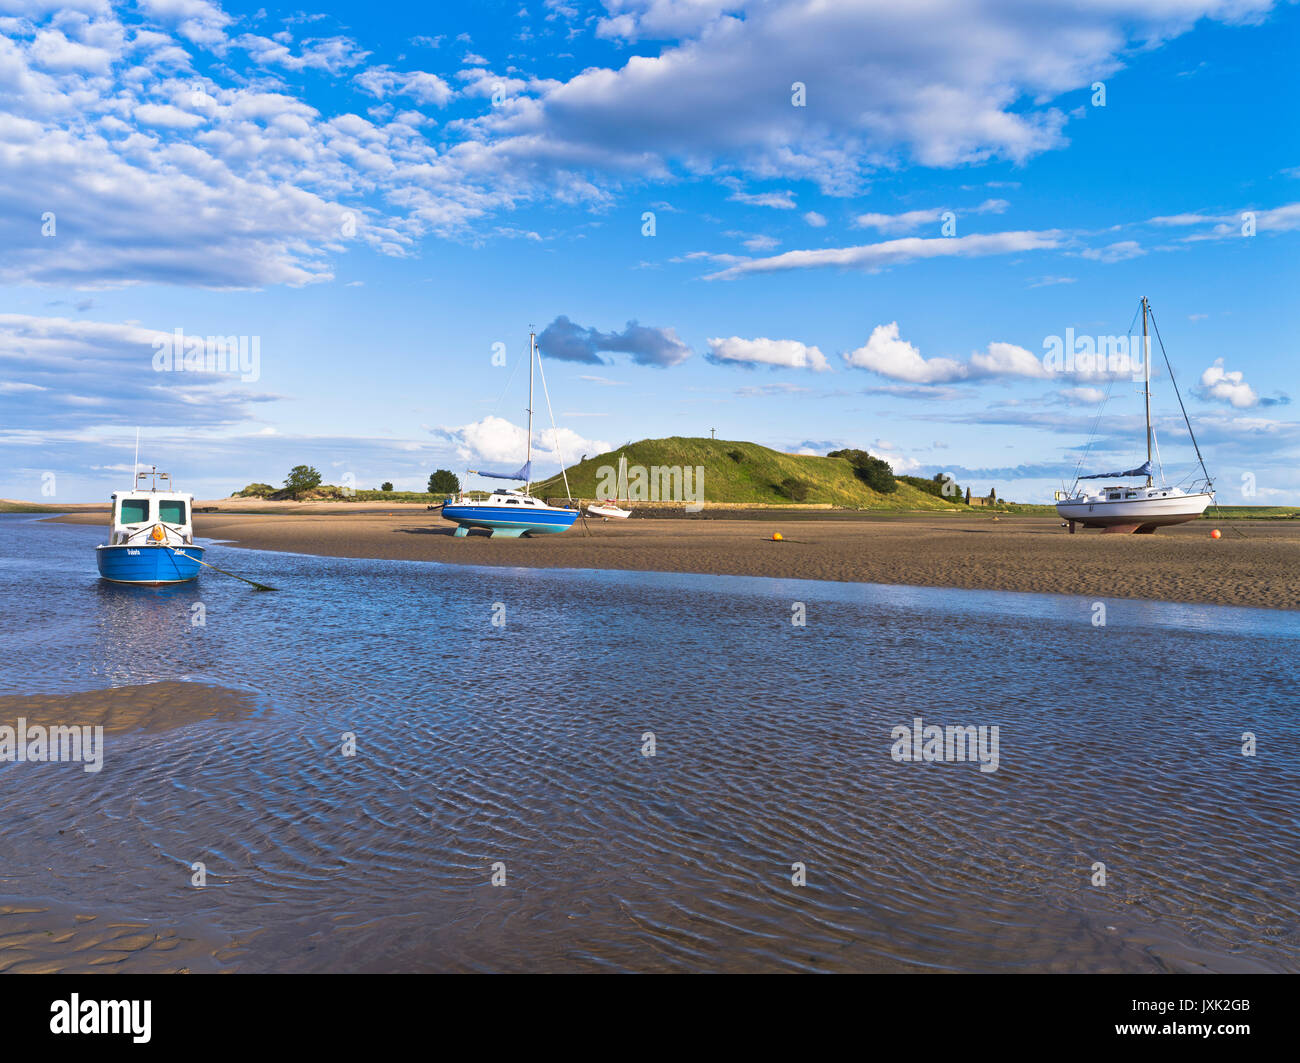 dh Alnmouth Bay ALNMOUTH NORTHUMBERLAND Boat Yachts Northumbria boat summer Abend an der Anchor Coast uk Anchorage Ebbe Stockfoto